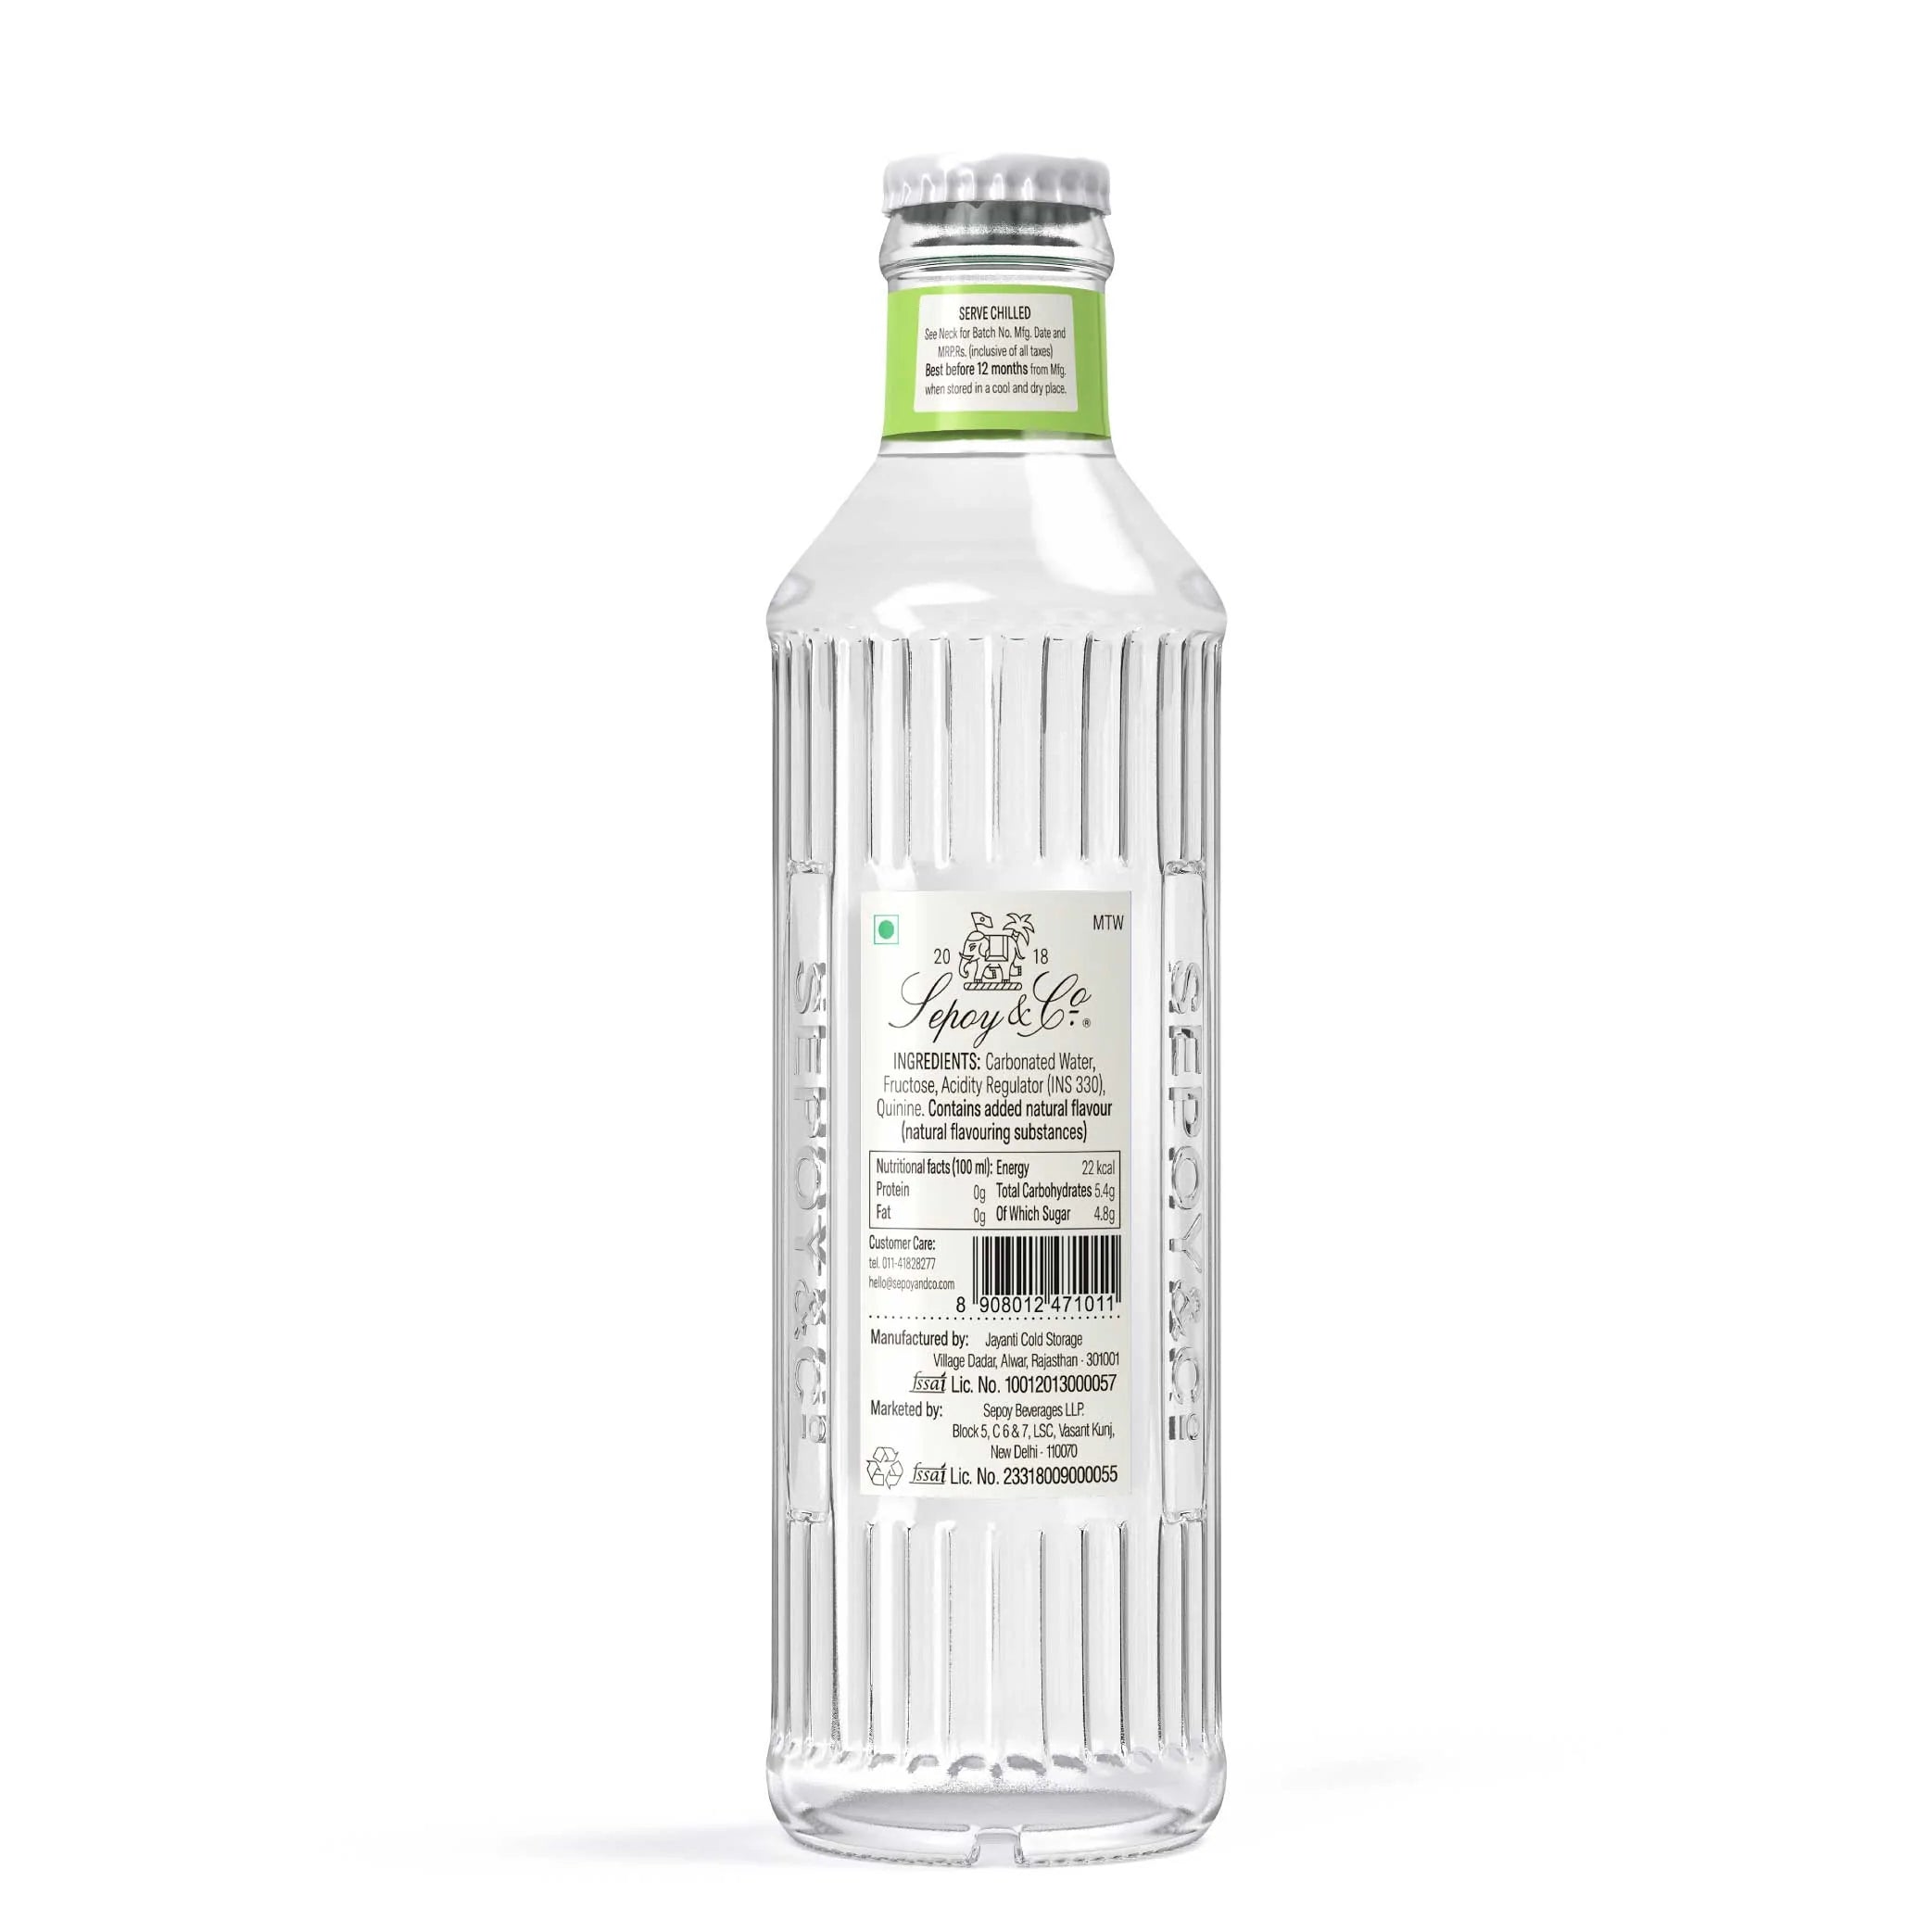 Sepoy and Co Mint Tonic Water, 200ml - Super 7 Mart